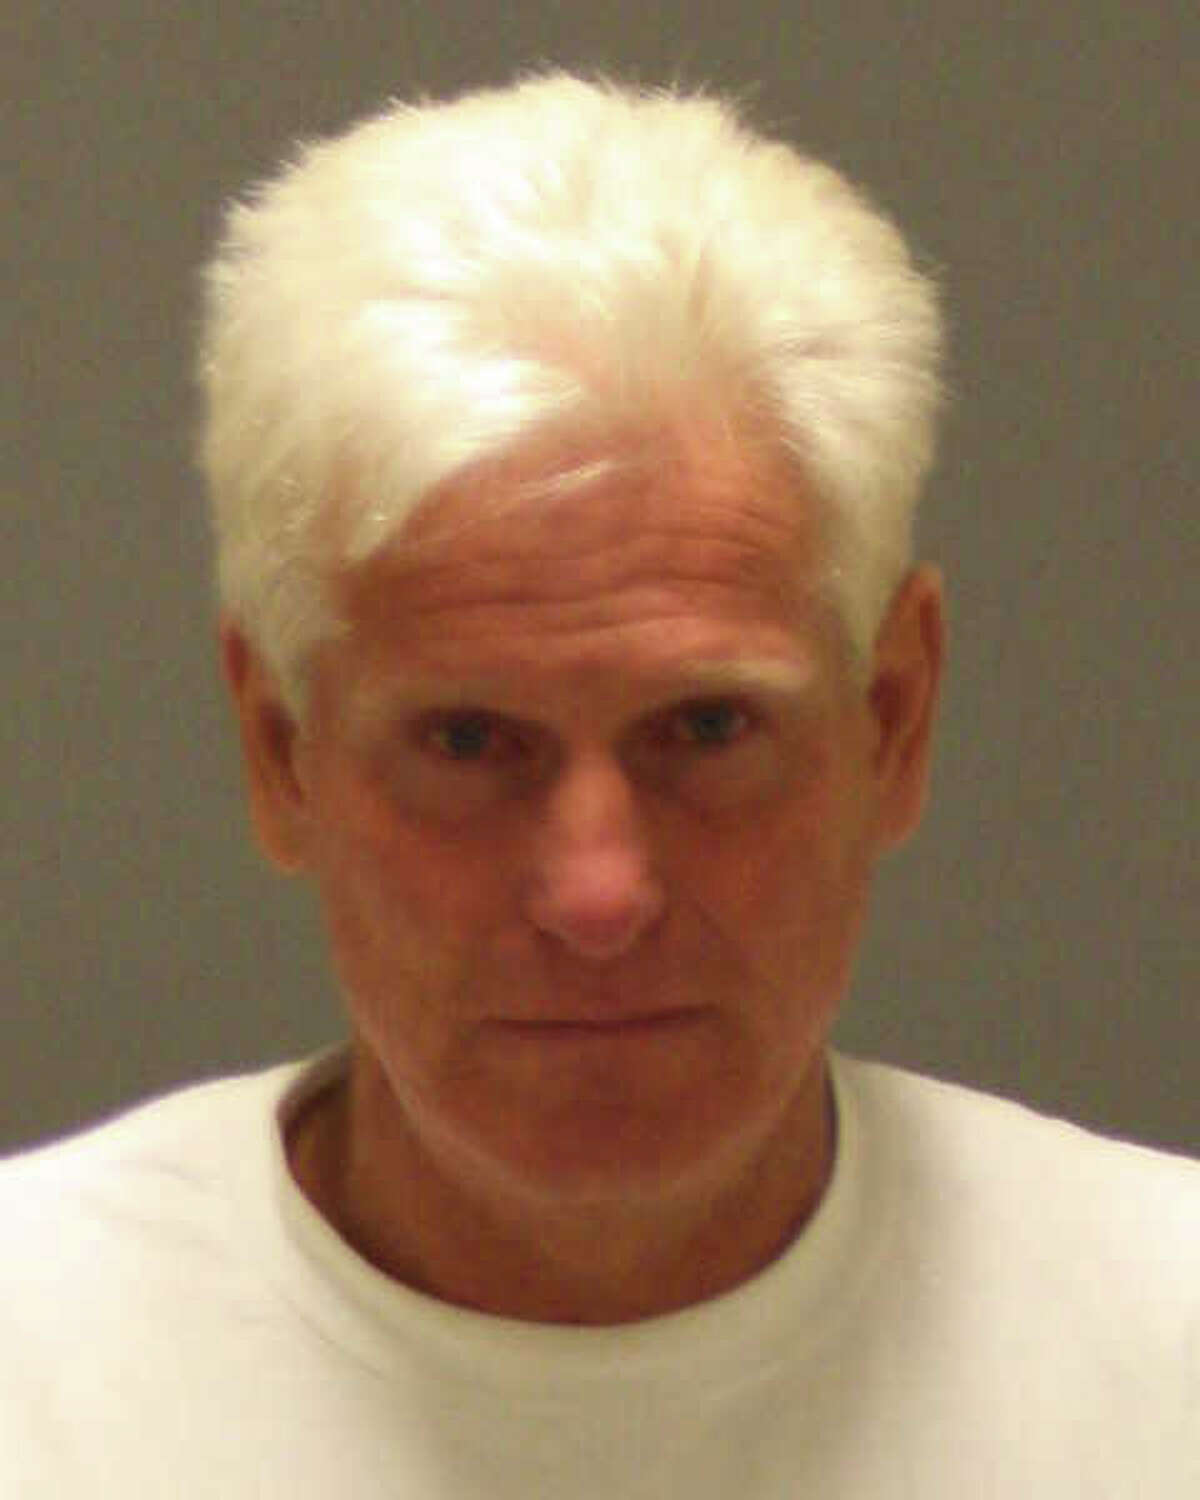 William Goodman, of Greenwich, was charged Friday, July 27, 2012, with second-degree illegal possession of child pornography. Photo courtesy of Greenwich Police